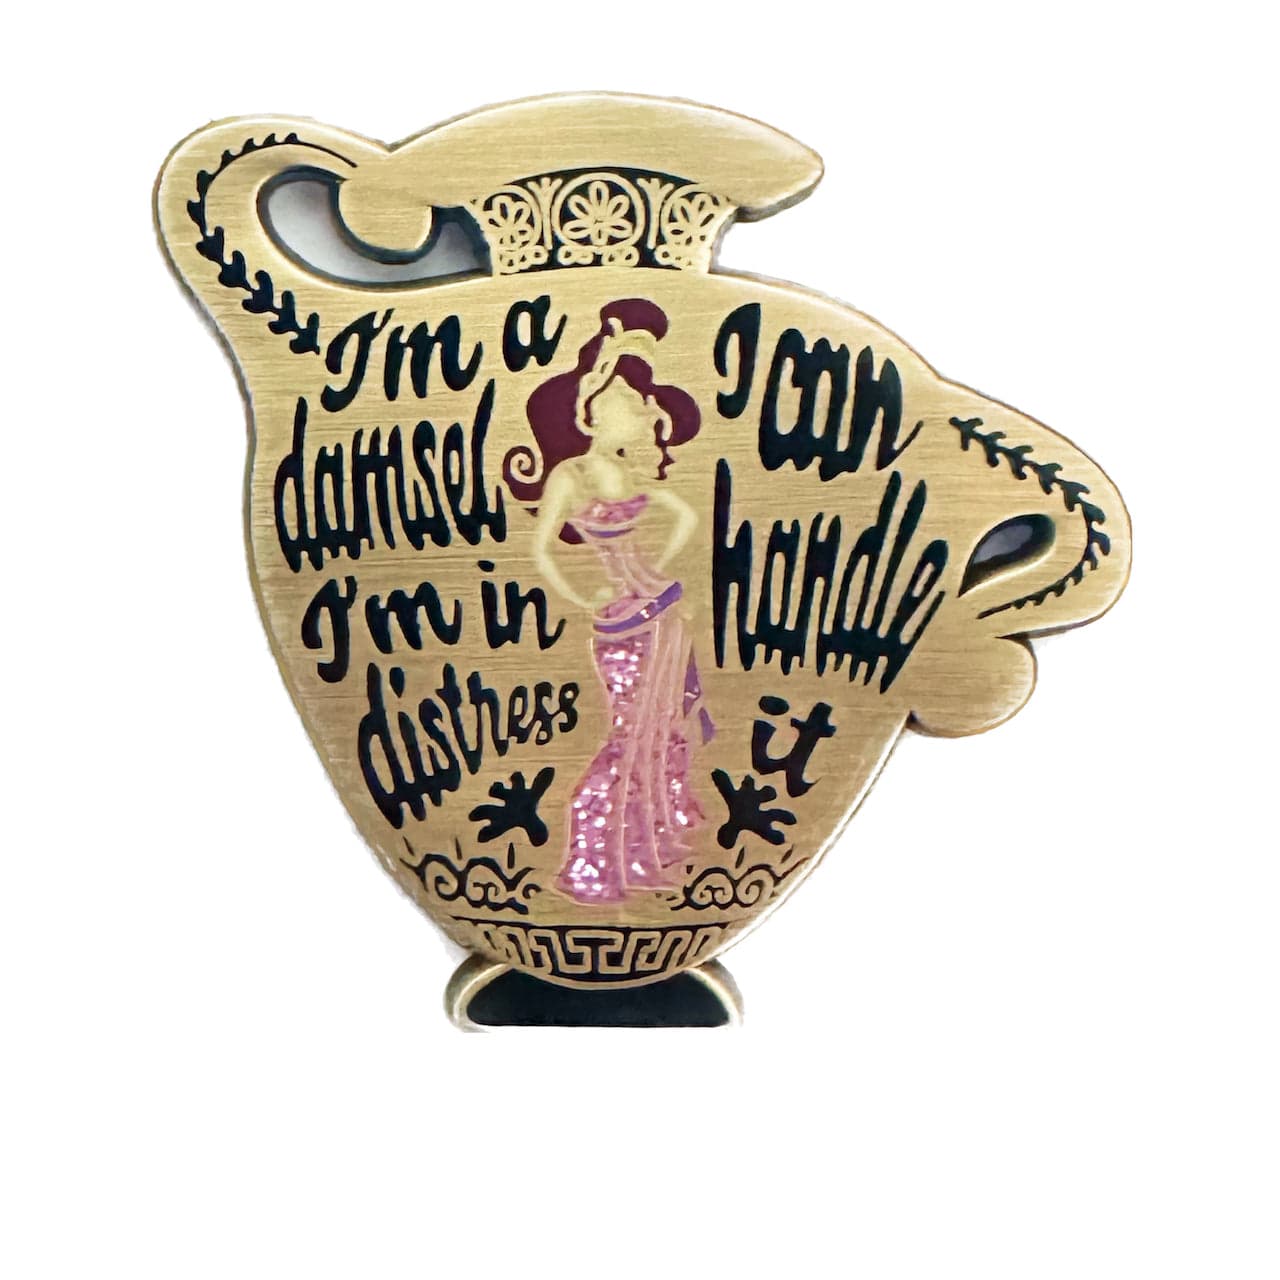 Pinbuds Enamel pin Meg Damsel pin featuring quote "I'm a damsel, I'm in distress, I can handle this." (glitter & antique gold)